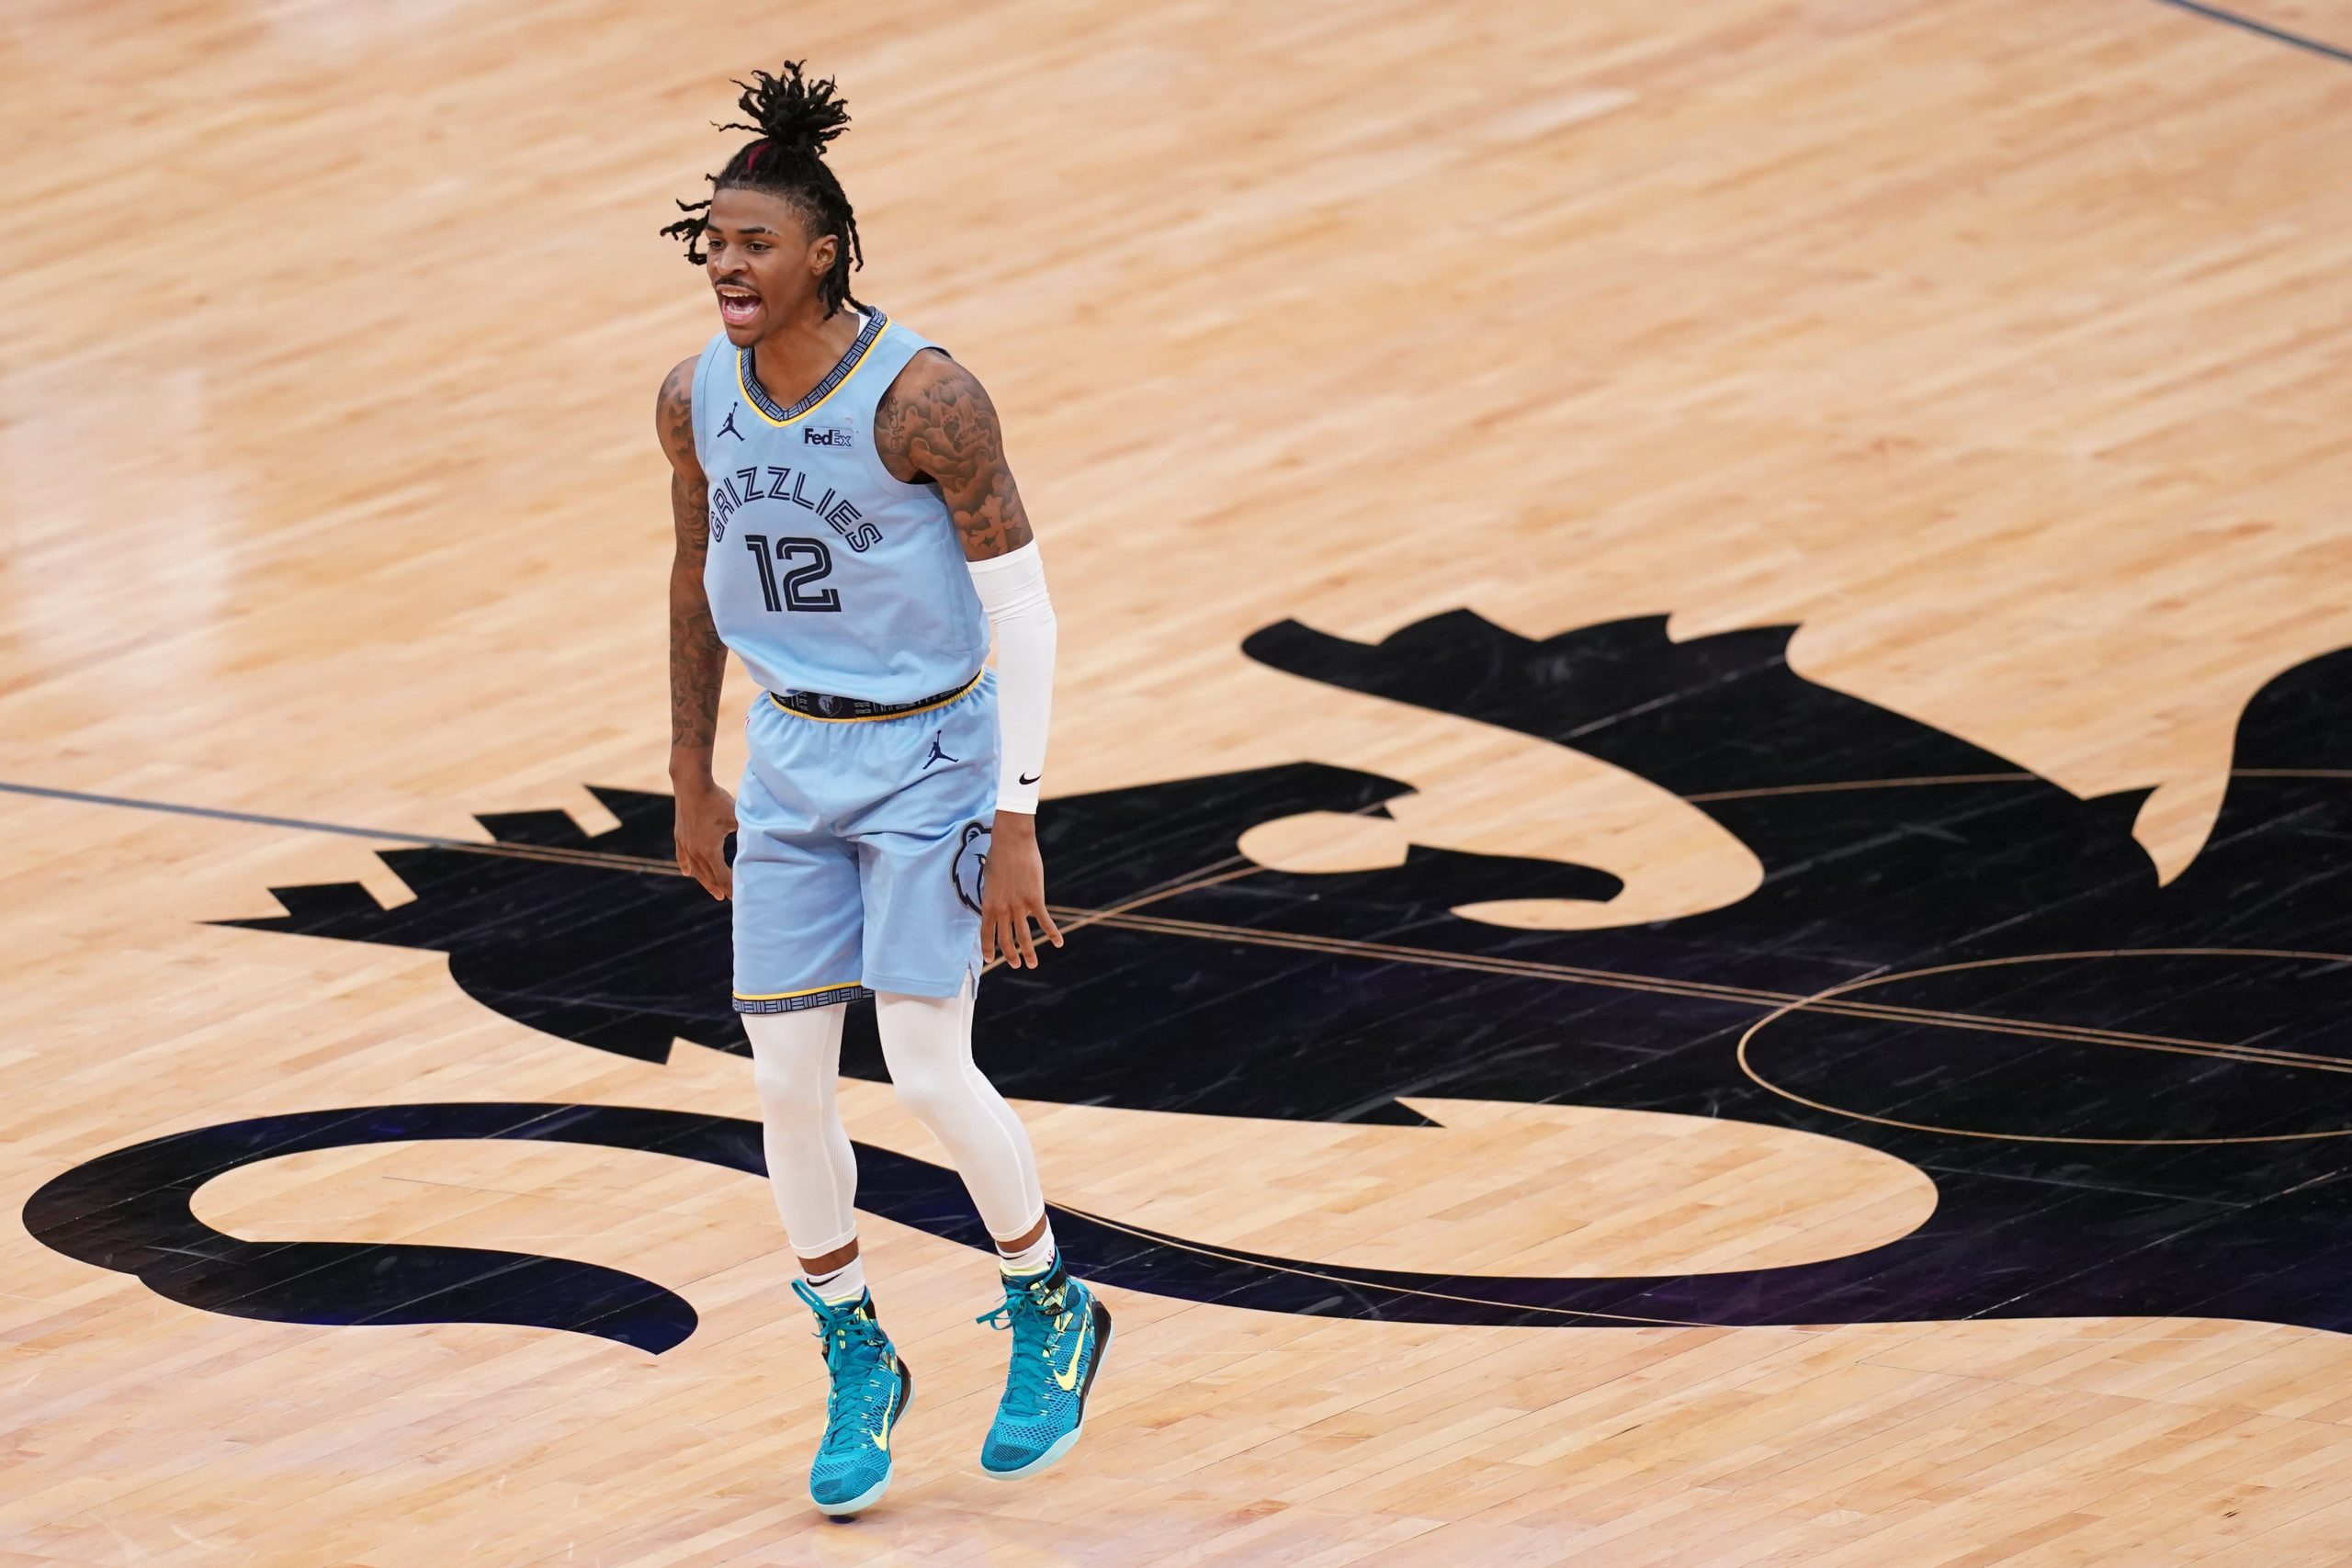 Memphis Grizzlies guard Ja Morant (12) reacts after the Grizzles scored a basket against the Sacramento Kings in the fourth quarter at the Golden 1 Center